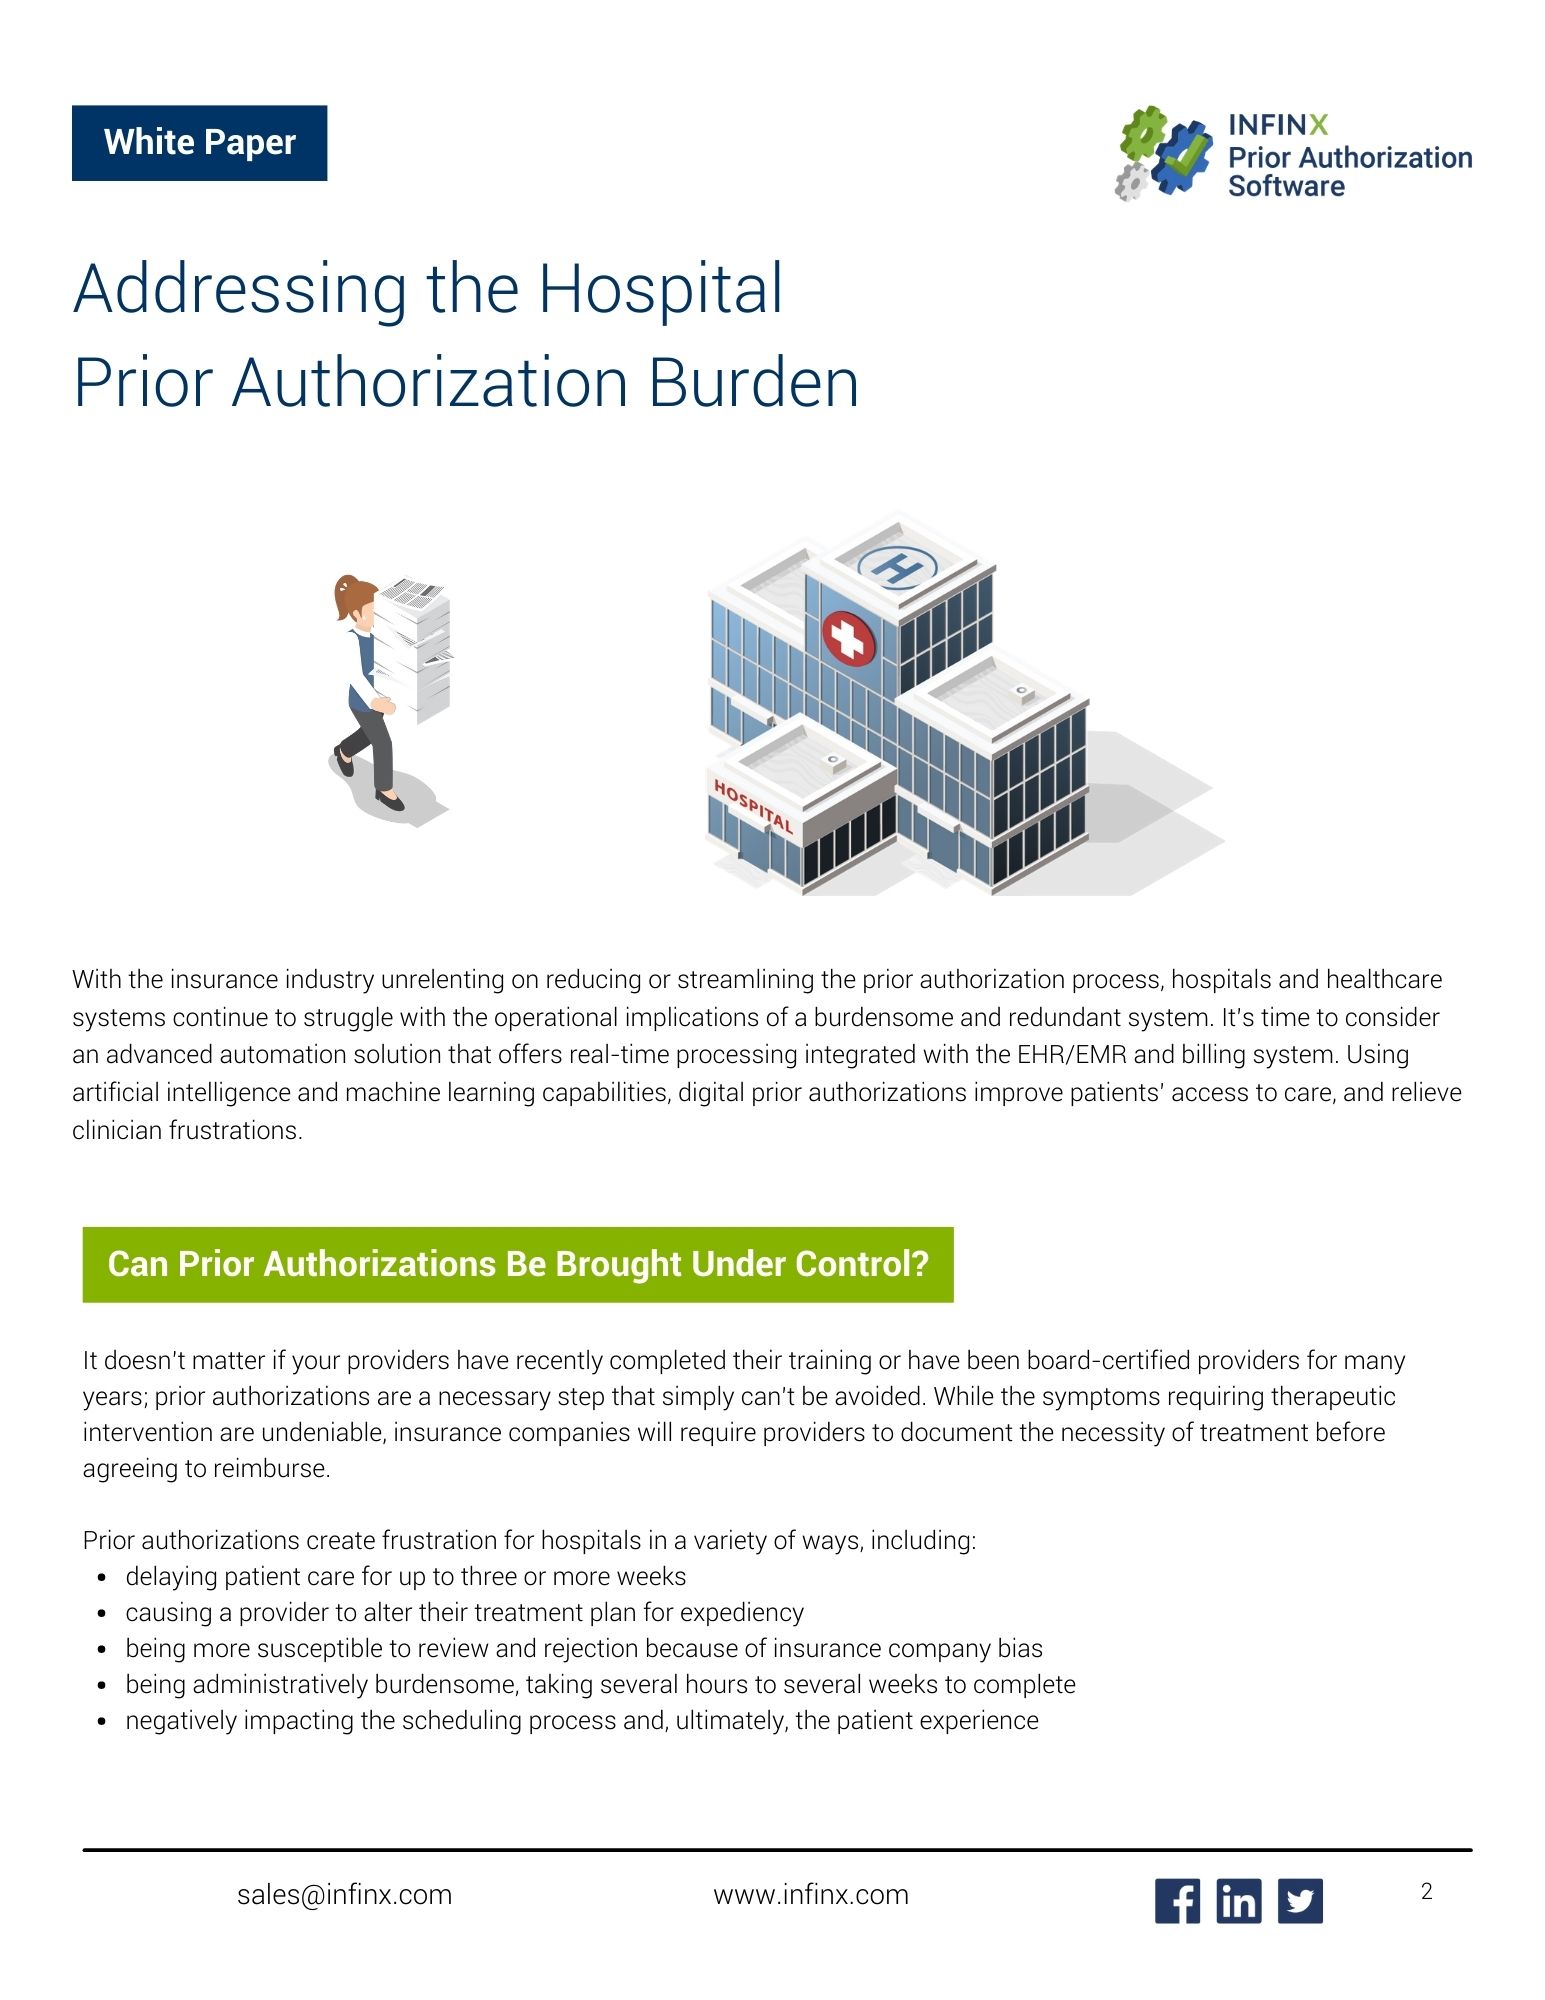 Infinx-WP-Addressing-the-Hospital-Prior-Authorization-Burden-May-10-2021-2